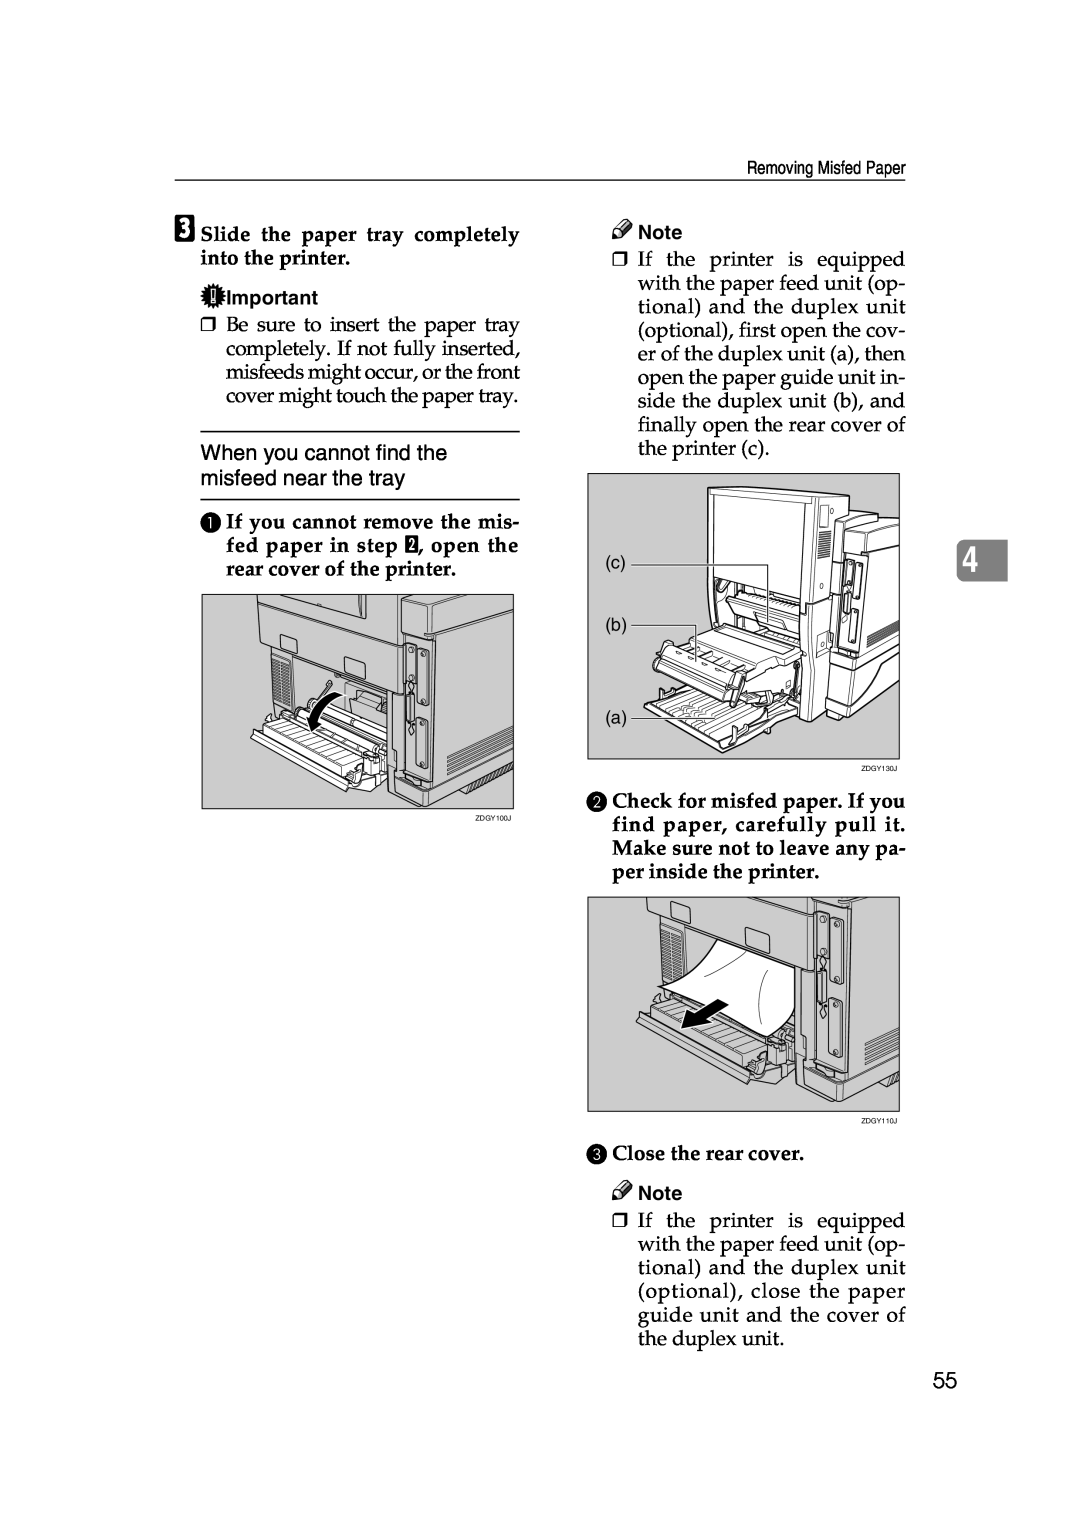 Lanier AP206 manual C Slide the paper tray completely into the printer, C Close the rear cover 